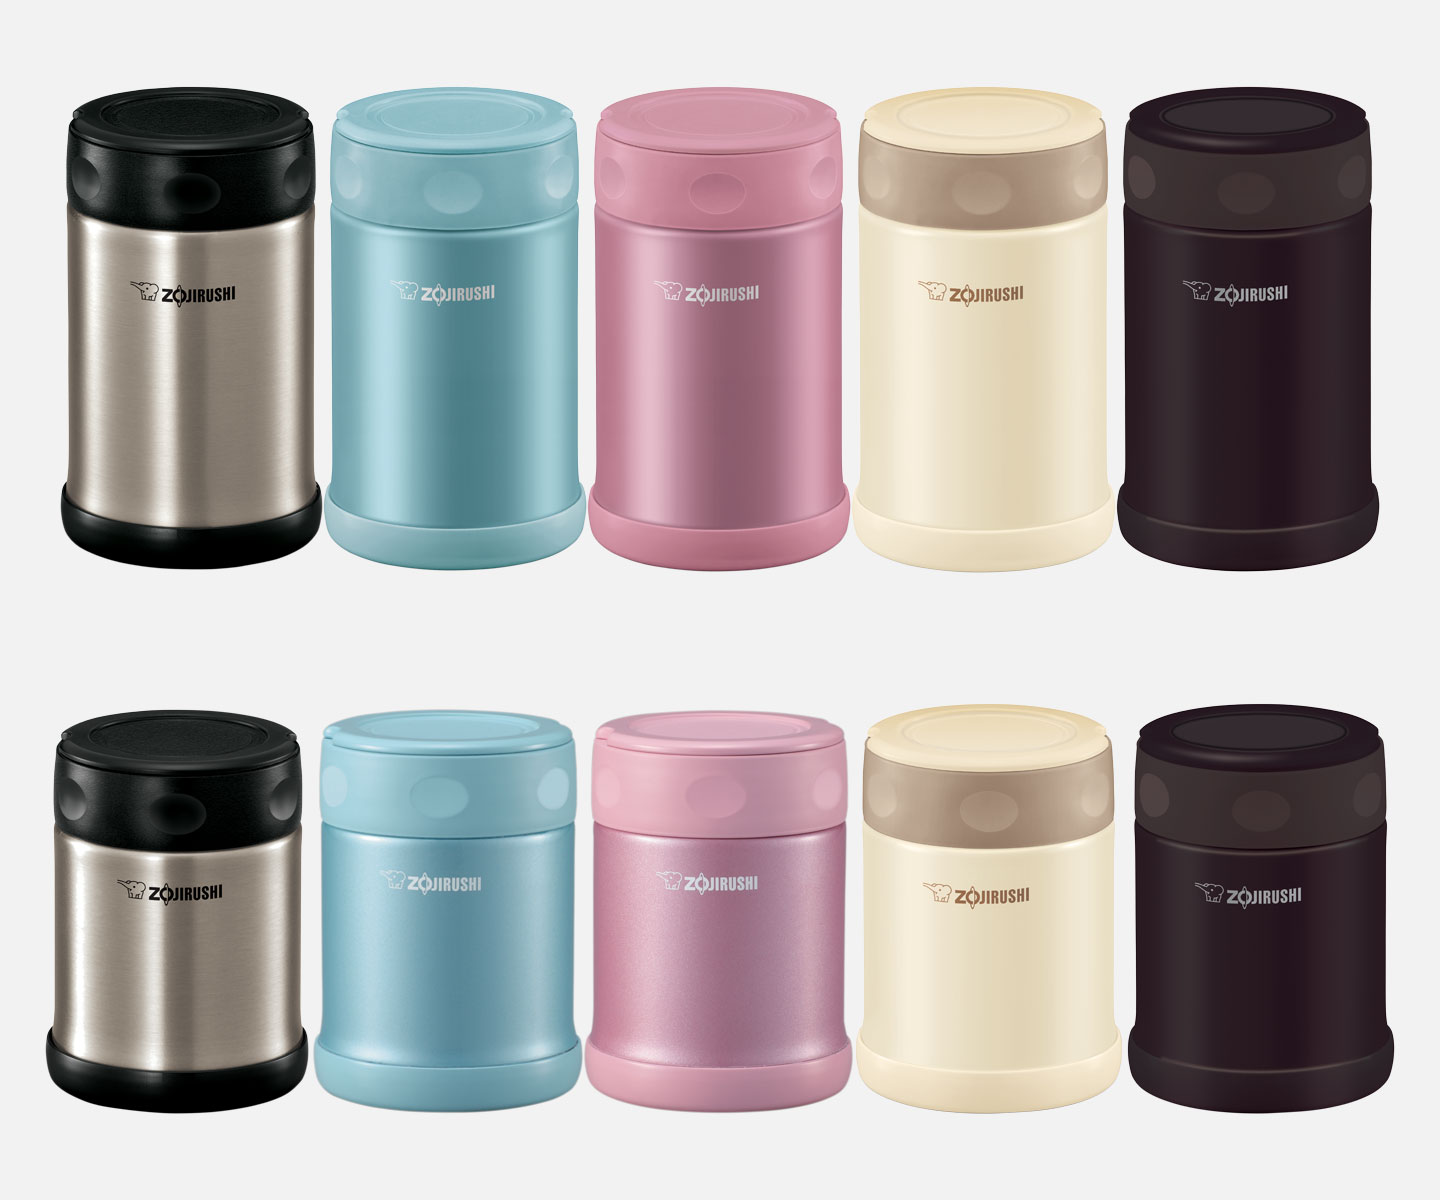 Zojirushi's Sparkly Food Thermos Has Inspired Me to Pack My Own Lunch Again